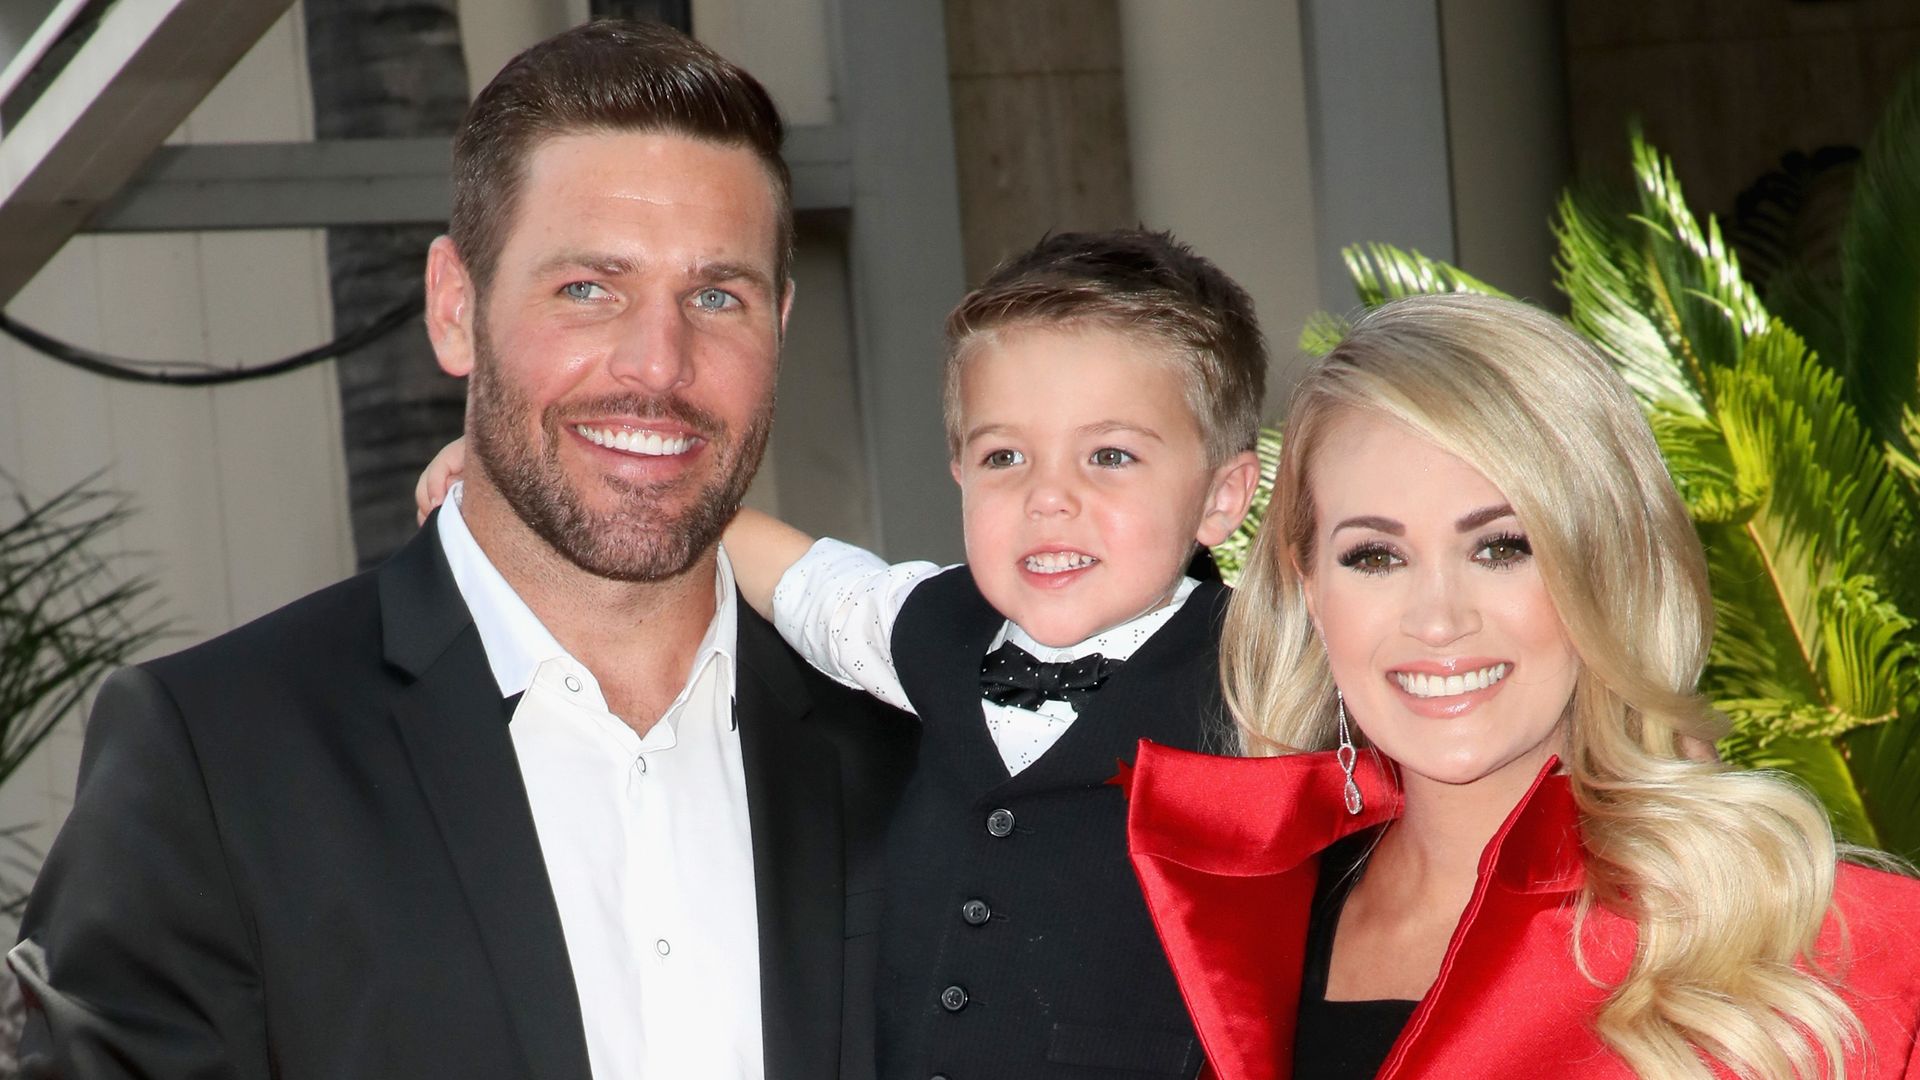 Carrie Underwood receives eye-catching update from 400-acre home she shares  with sons and husband